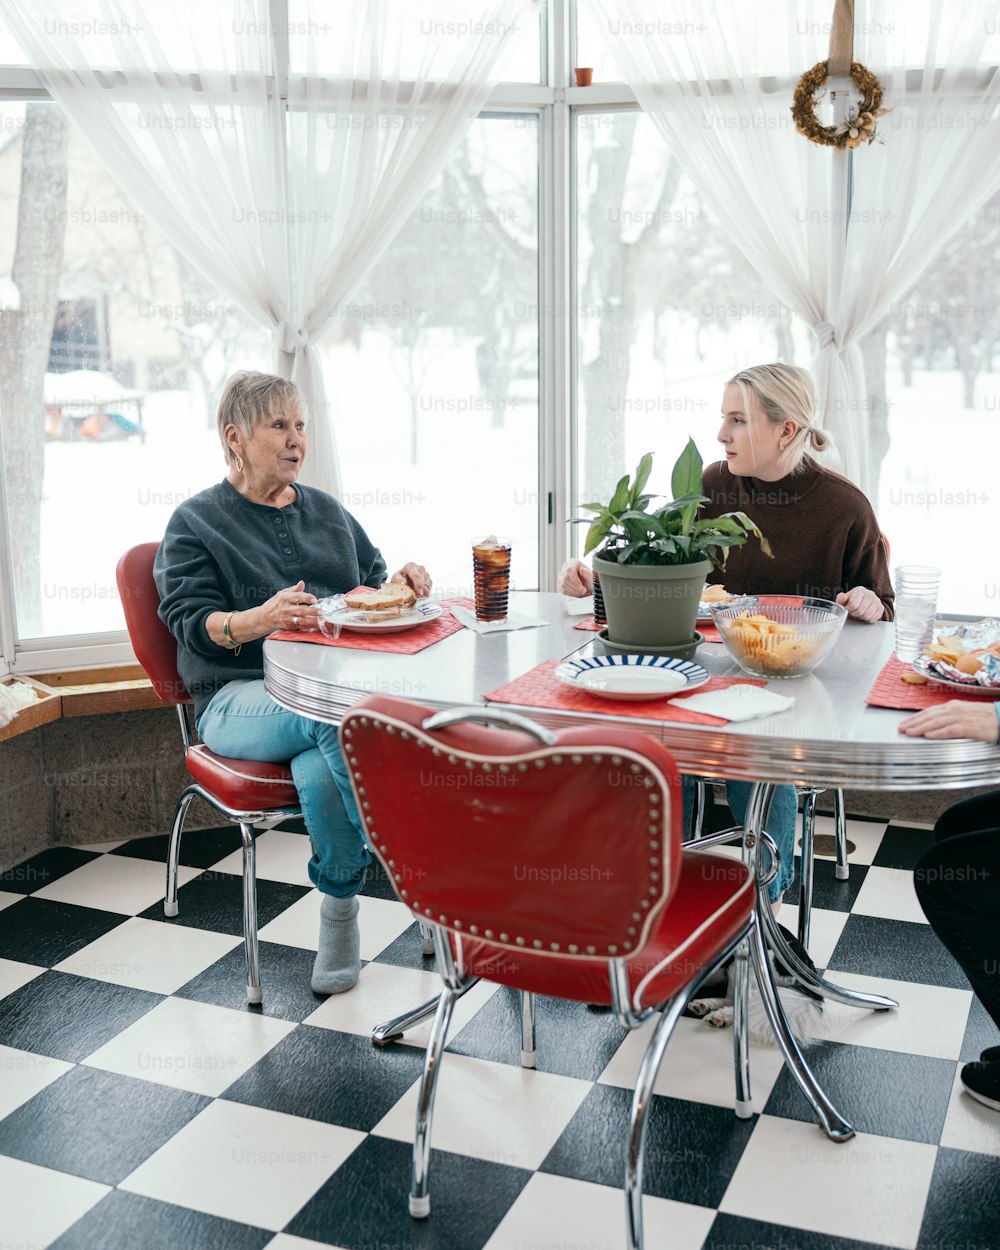 a couple of women sitting at a table with plates of food